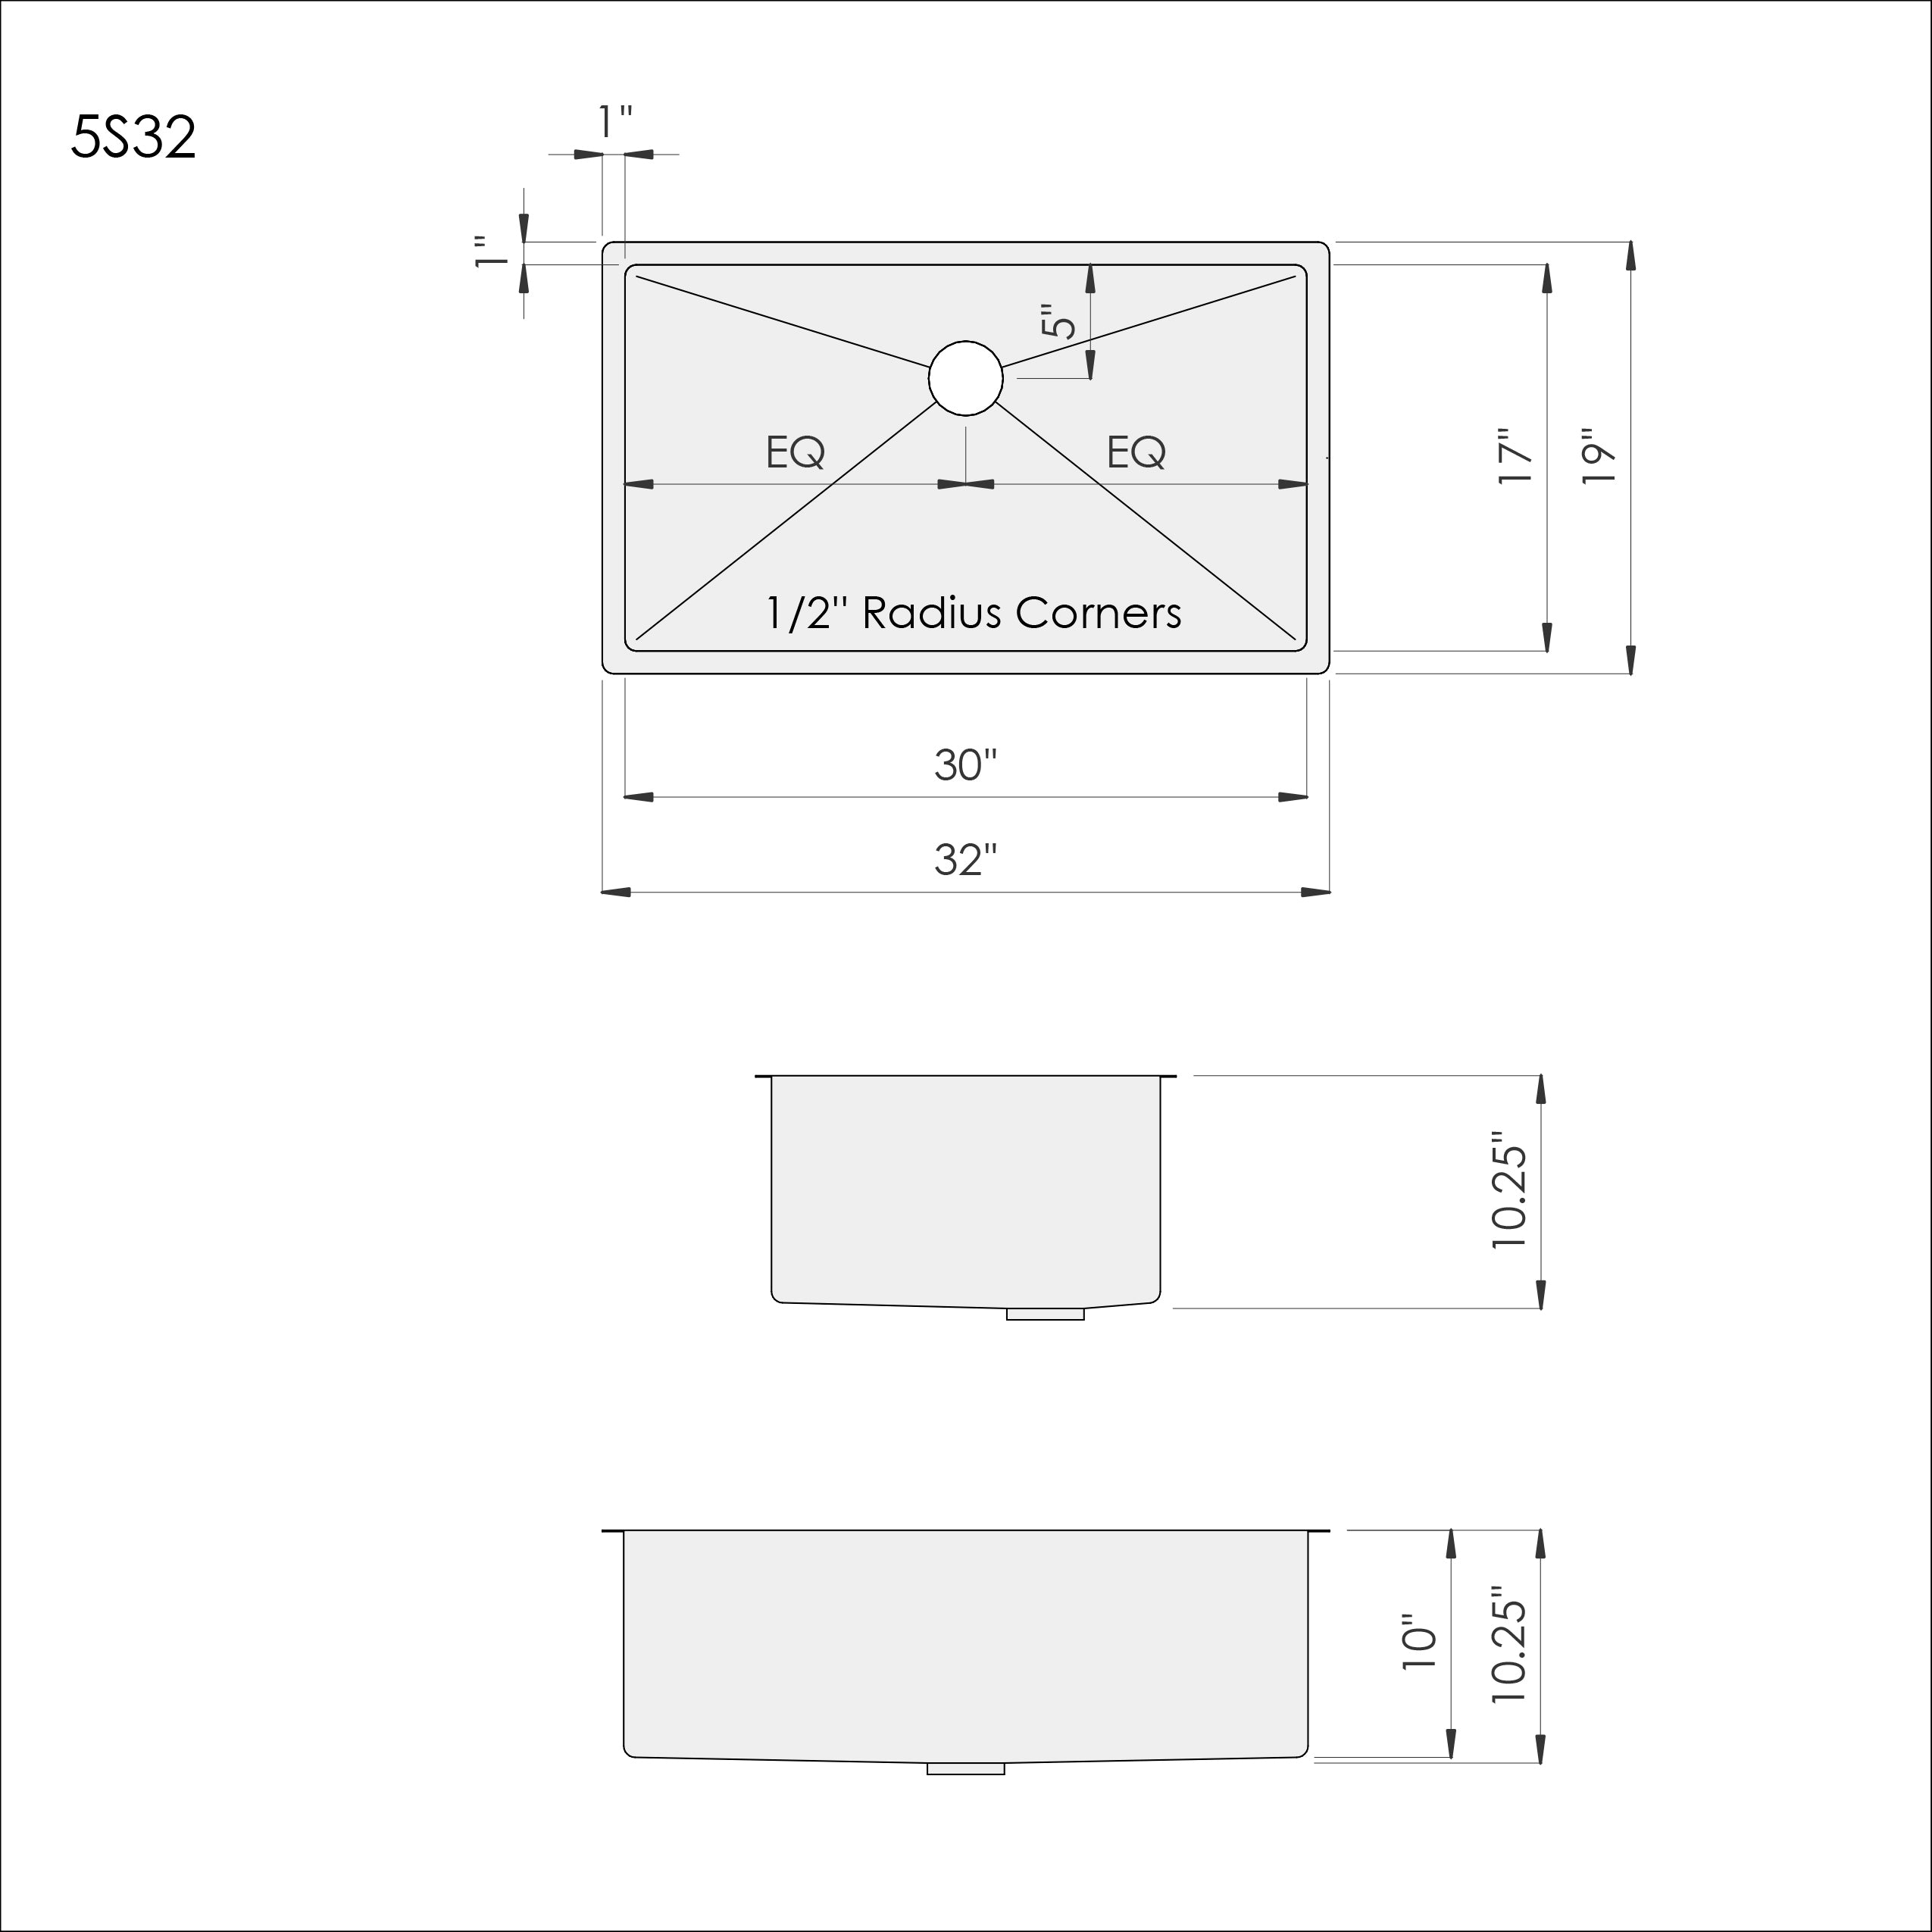 Dimensions of Create Good Sinks 32 inch stainless steel undermount kitchen sink with center drain. Patented seamless drain design and 10 inch depth and half inch radius corners